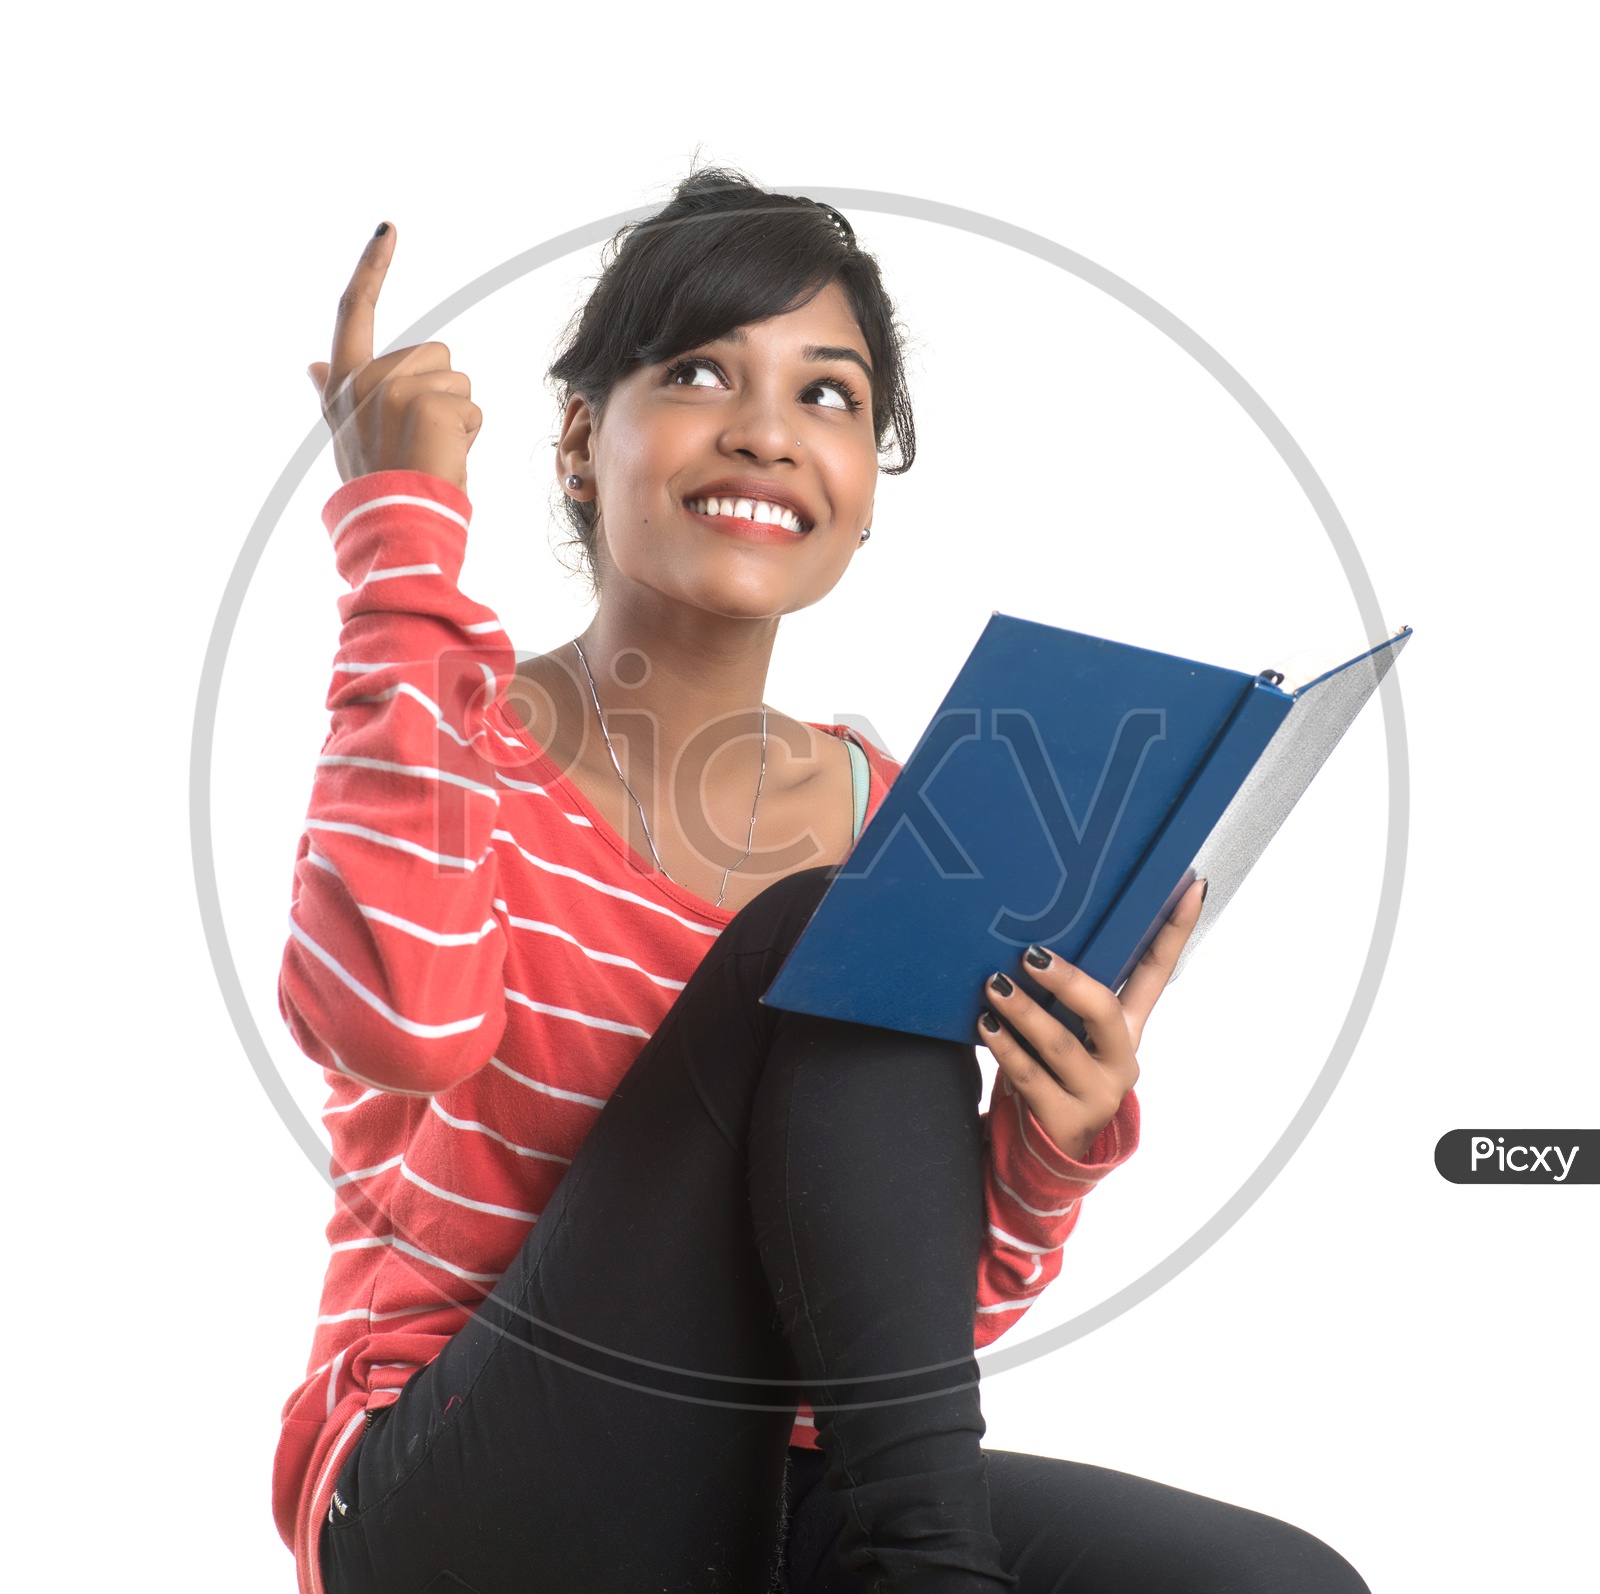 6 yoga poses you can practice while reading | Times of India